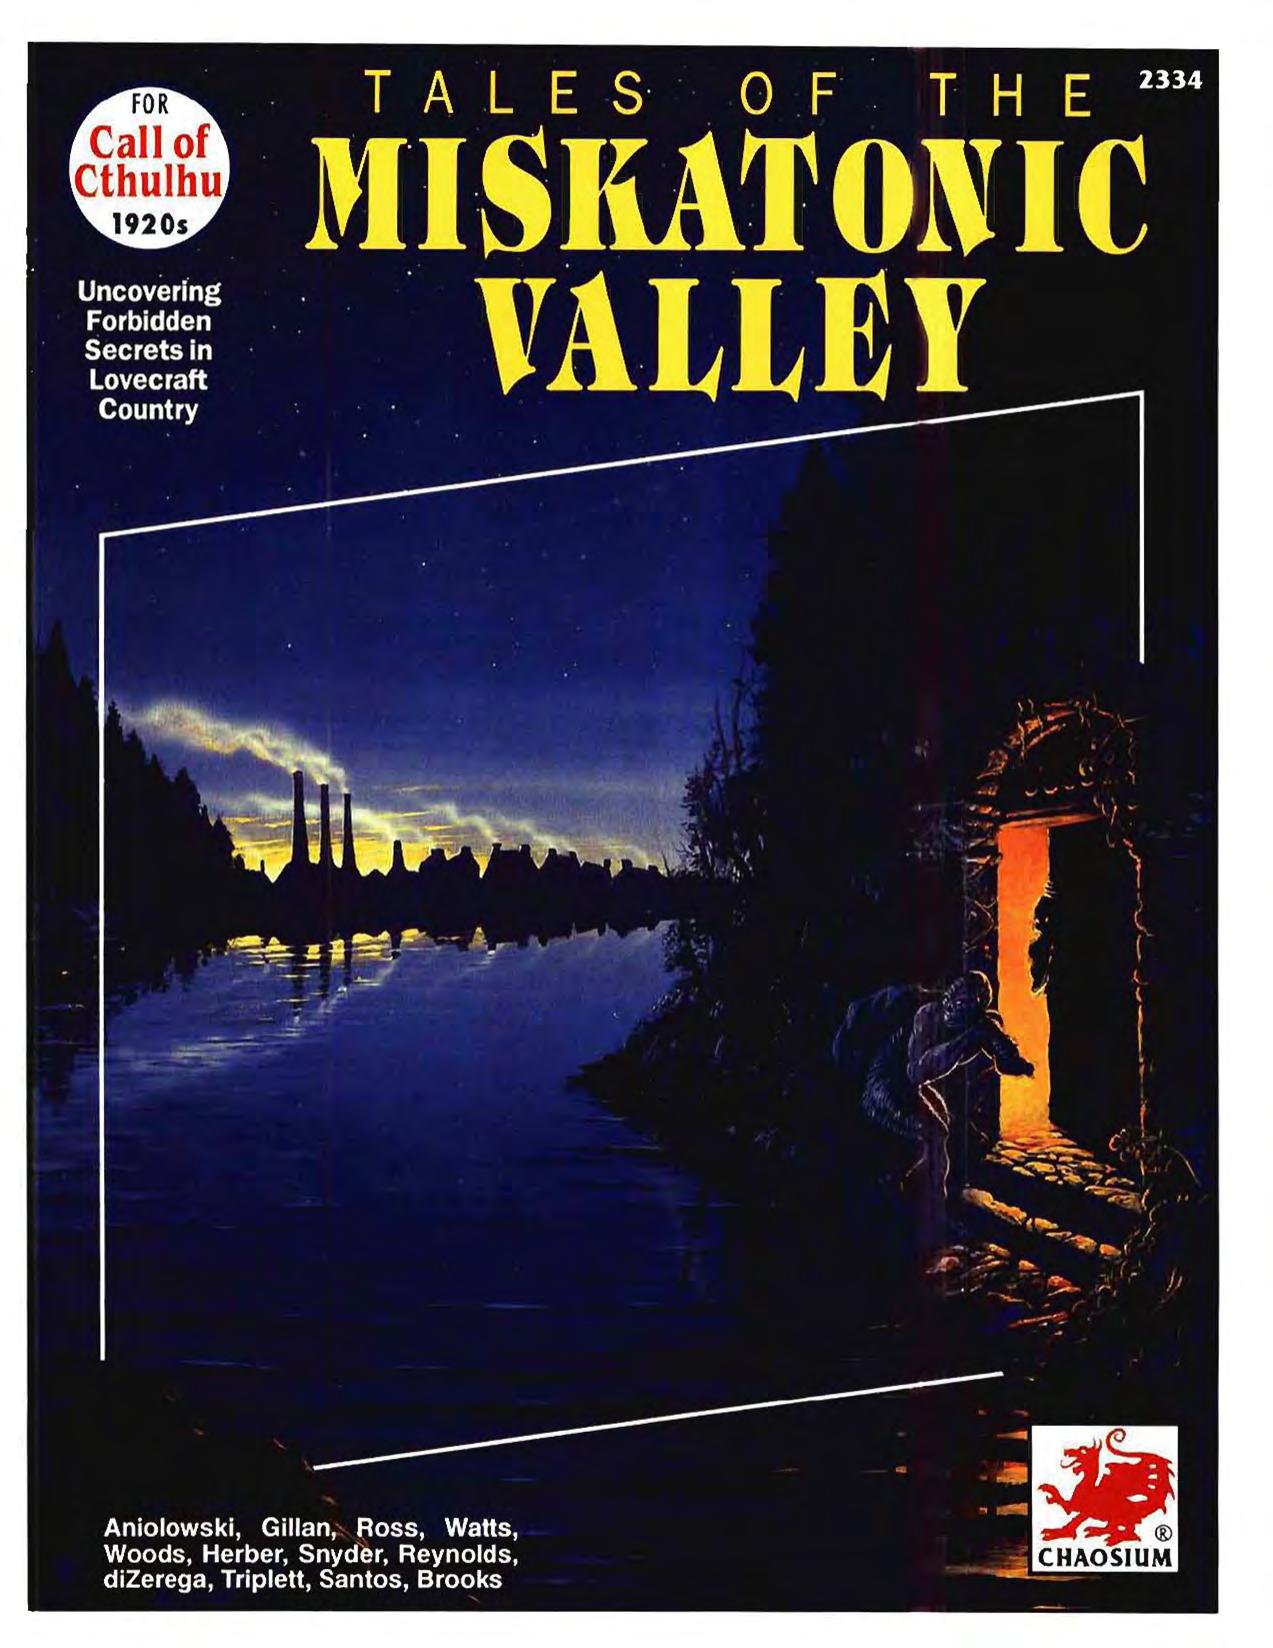 CoC 1920s Tales of the Miskatonic Valley